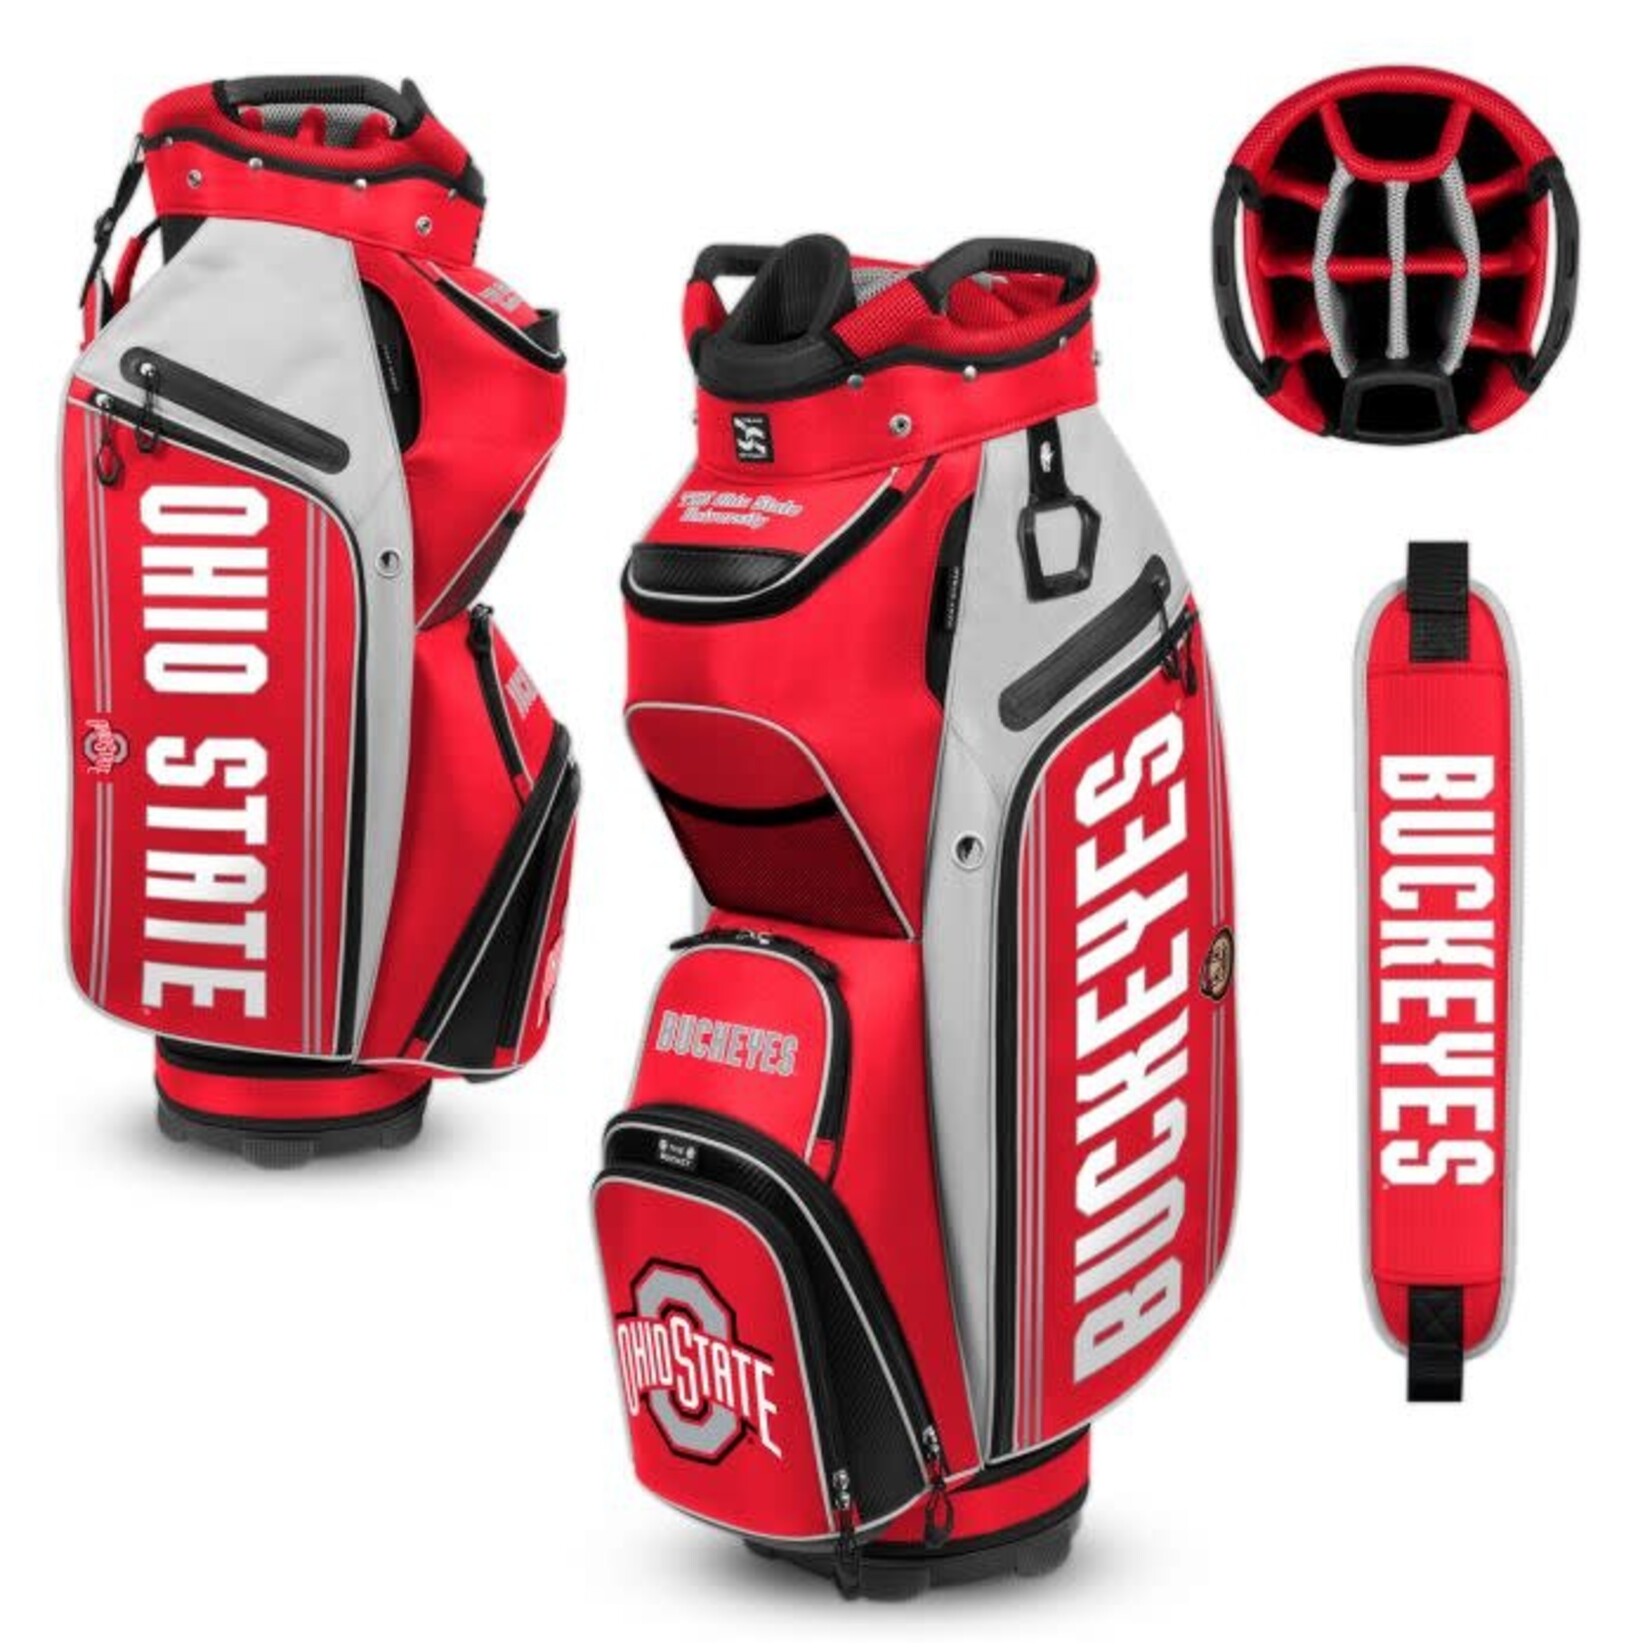 Wincraft THE OHIO STATE Cooler Cart Bag